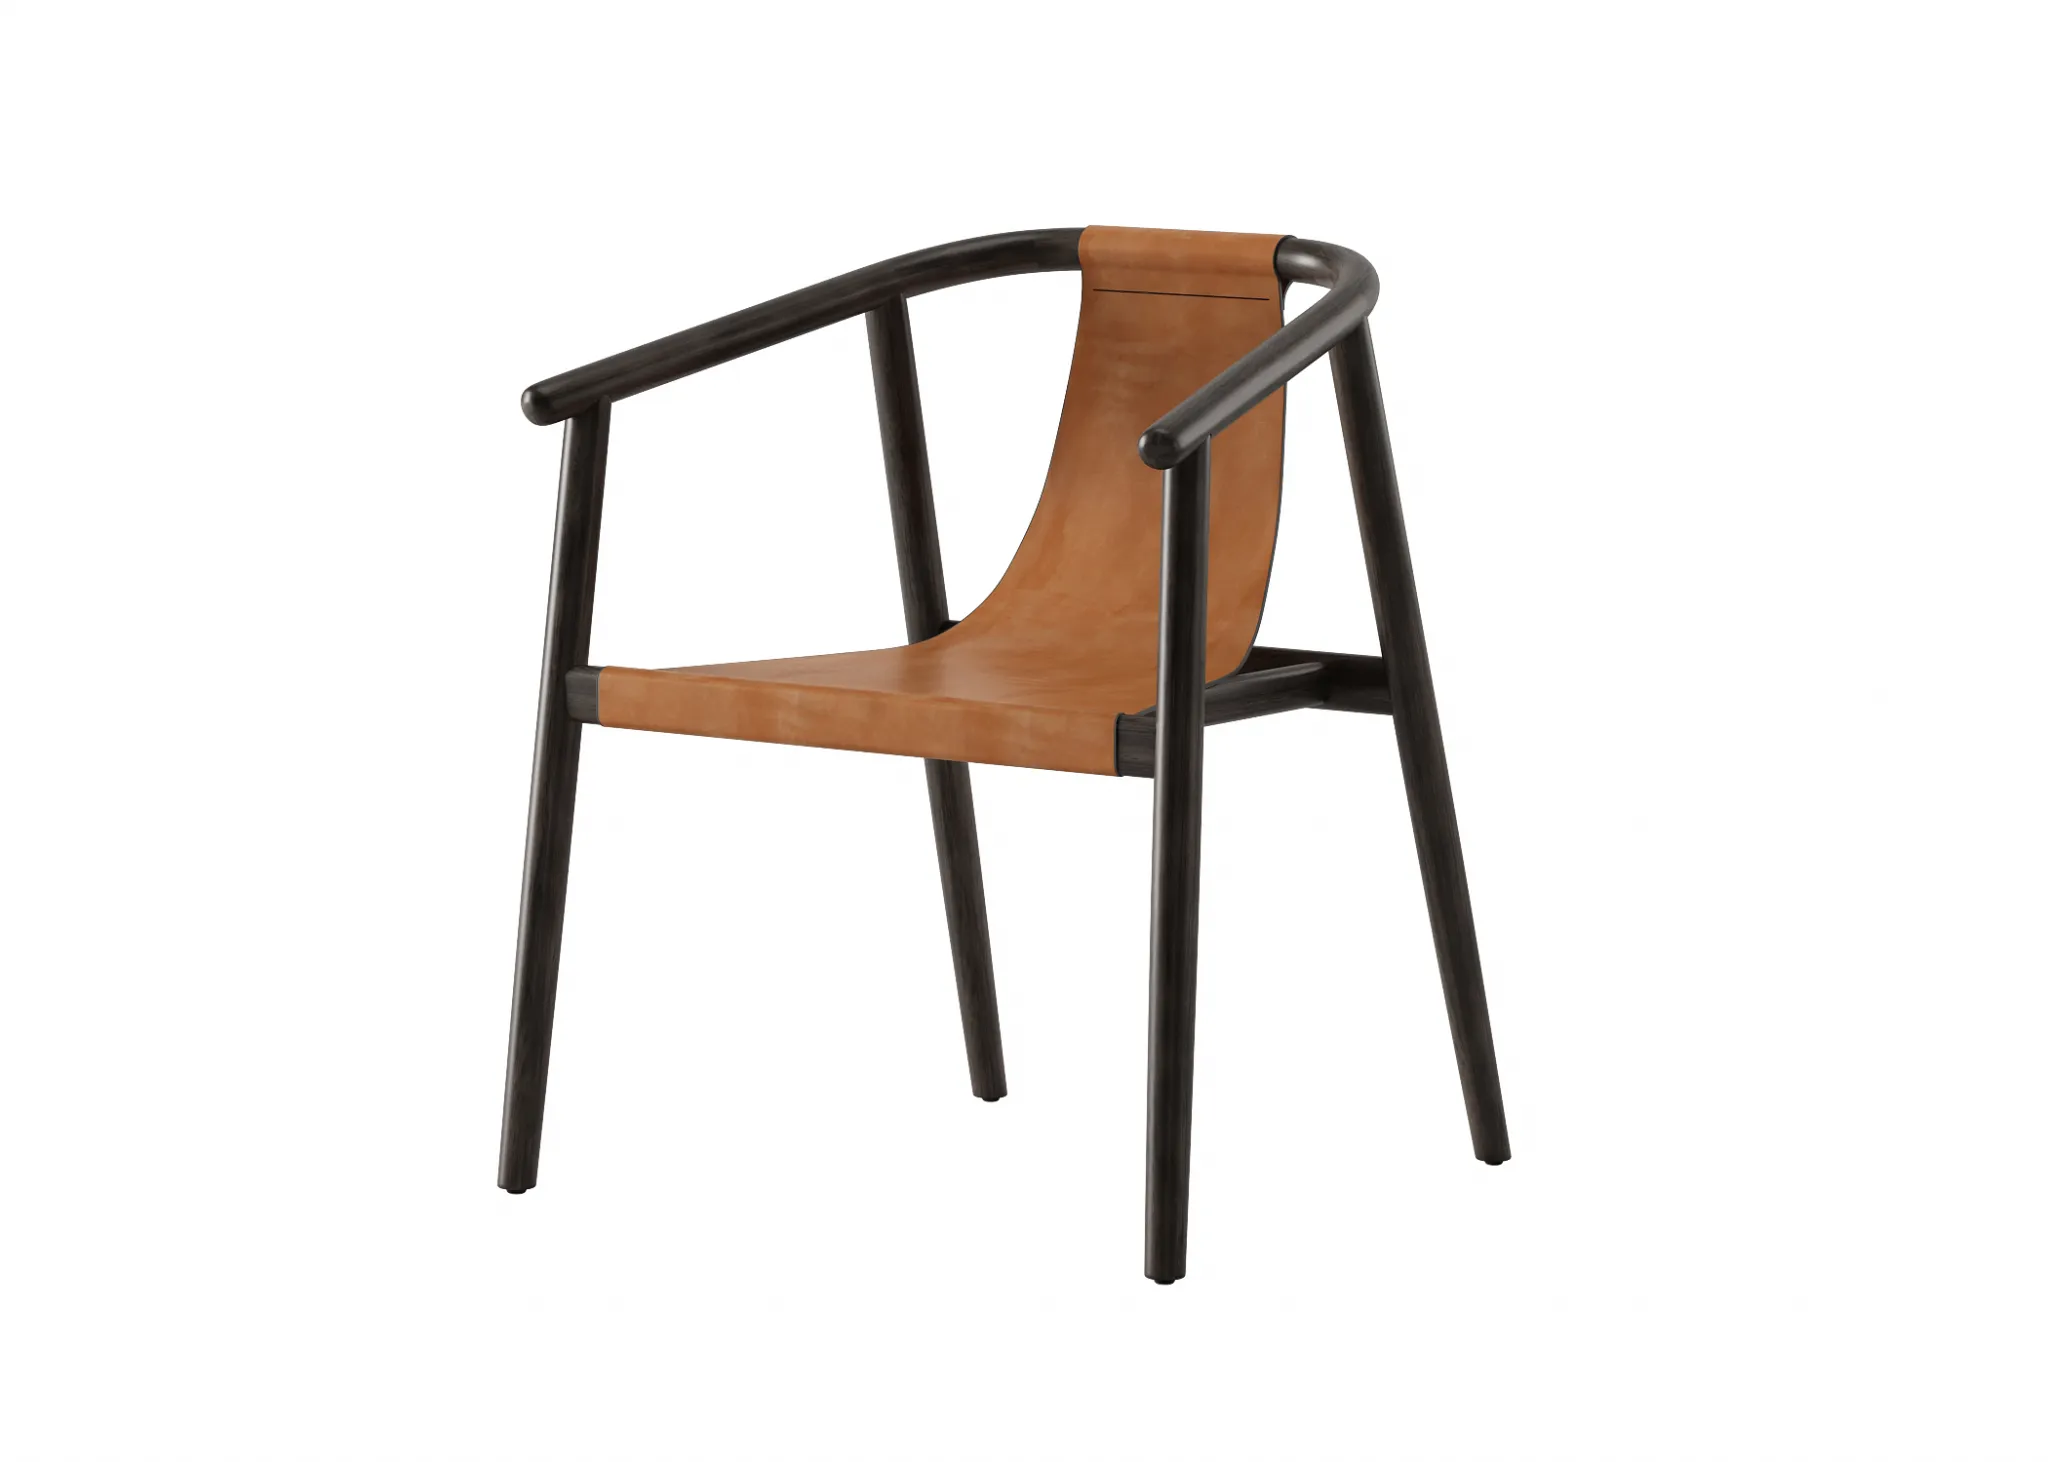 FURNITURE 3D MODELS – CHAIRS – 0353